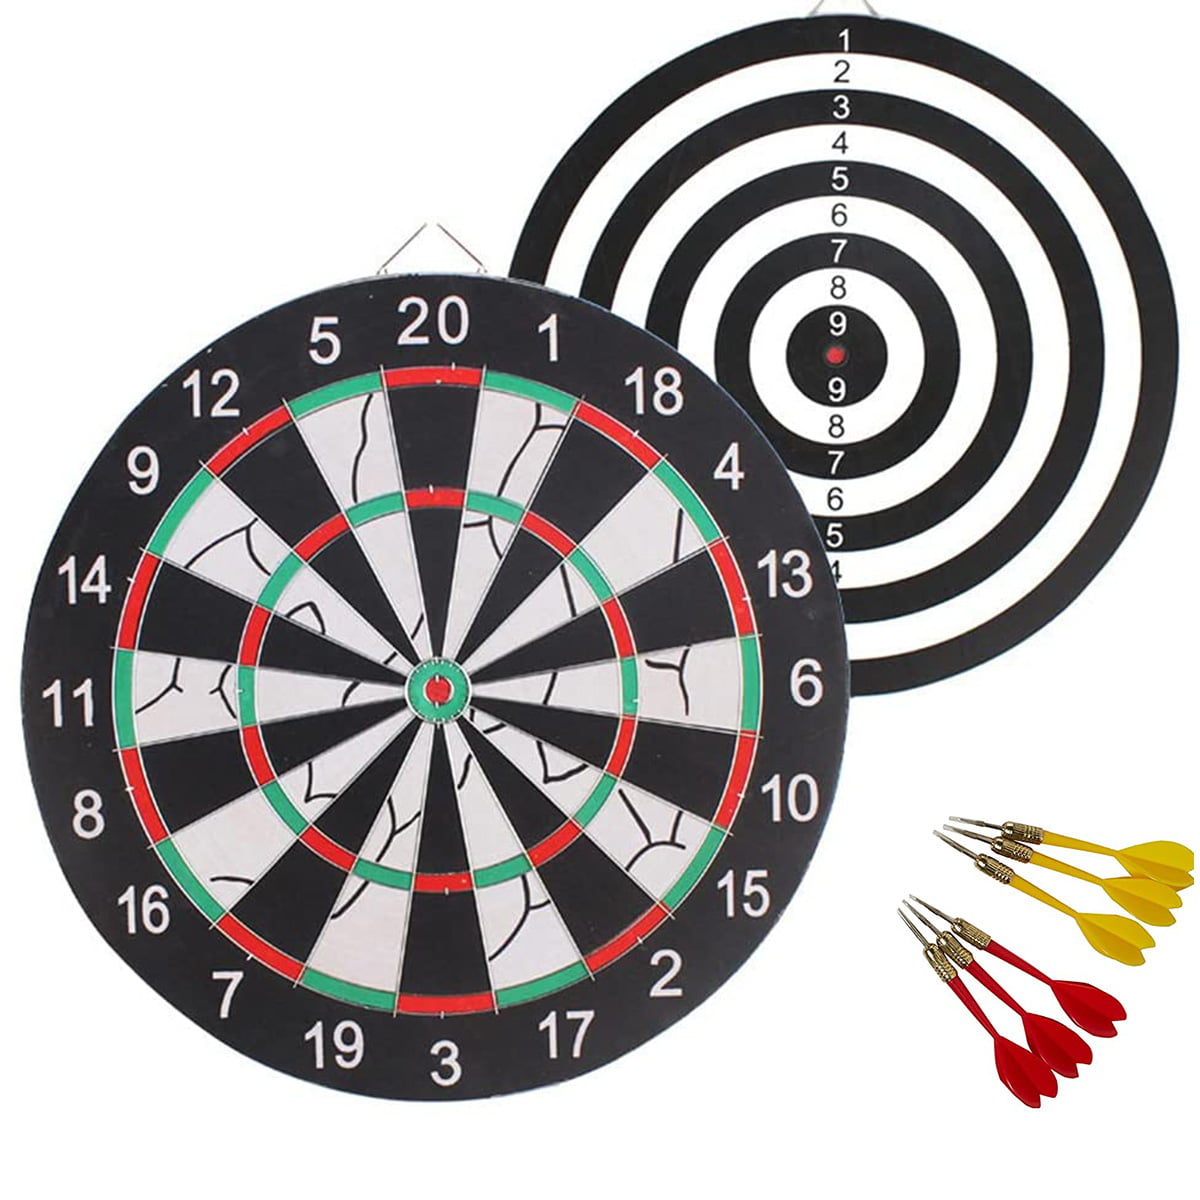 Paper Dartboard 2 Sided with 2 Games 12 Steeltip Darts Include 15 inch 